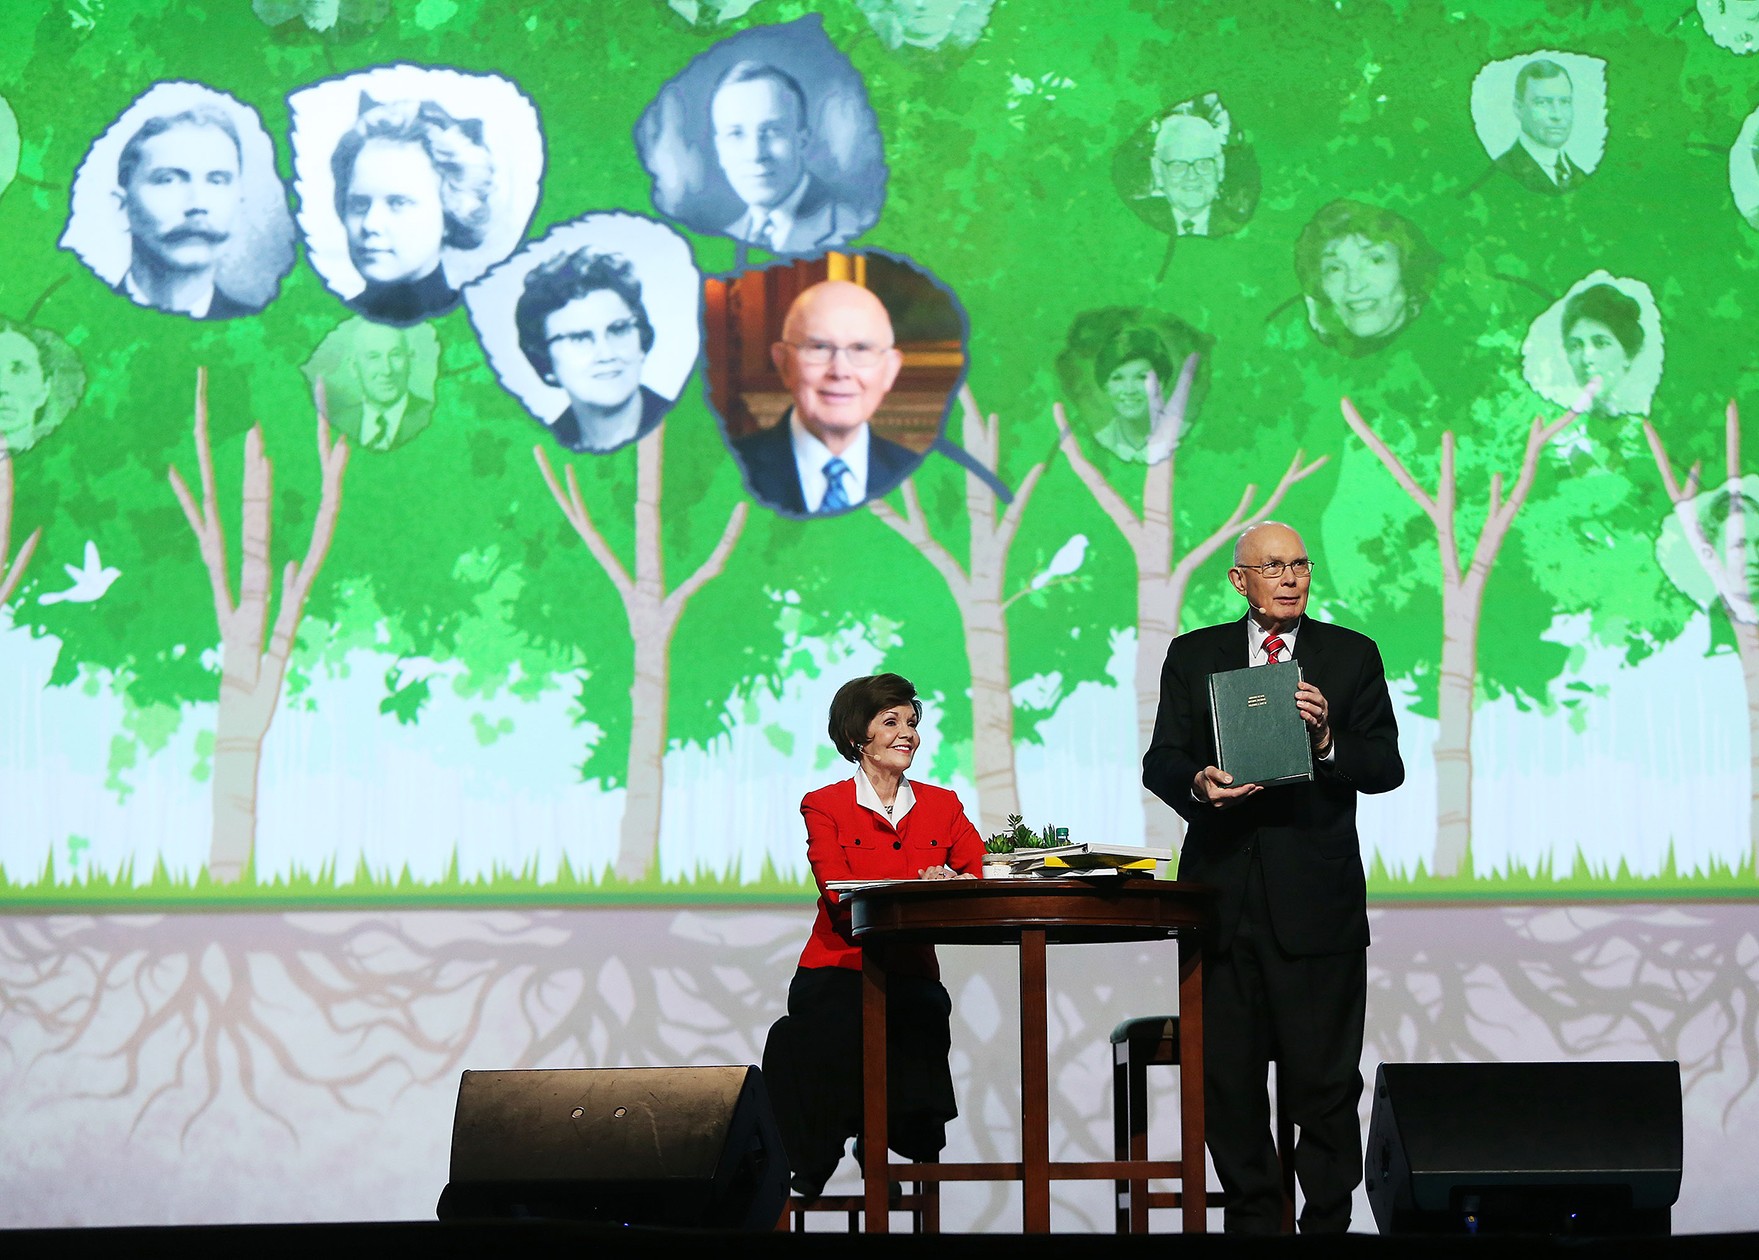 President Dallin H. Oaks, First Counselor in the First Presidency, and his wife, Sister Kristen Oaks, speak at RootsTech Family Discovery Day in Salt Lake City on Saturday, March 3, 2018.